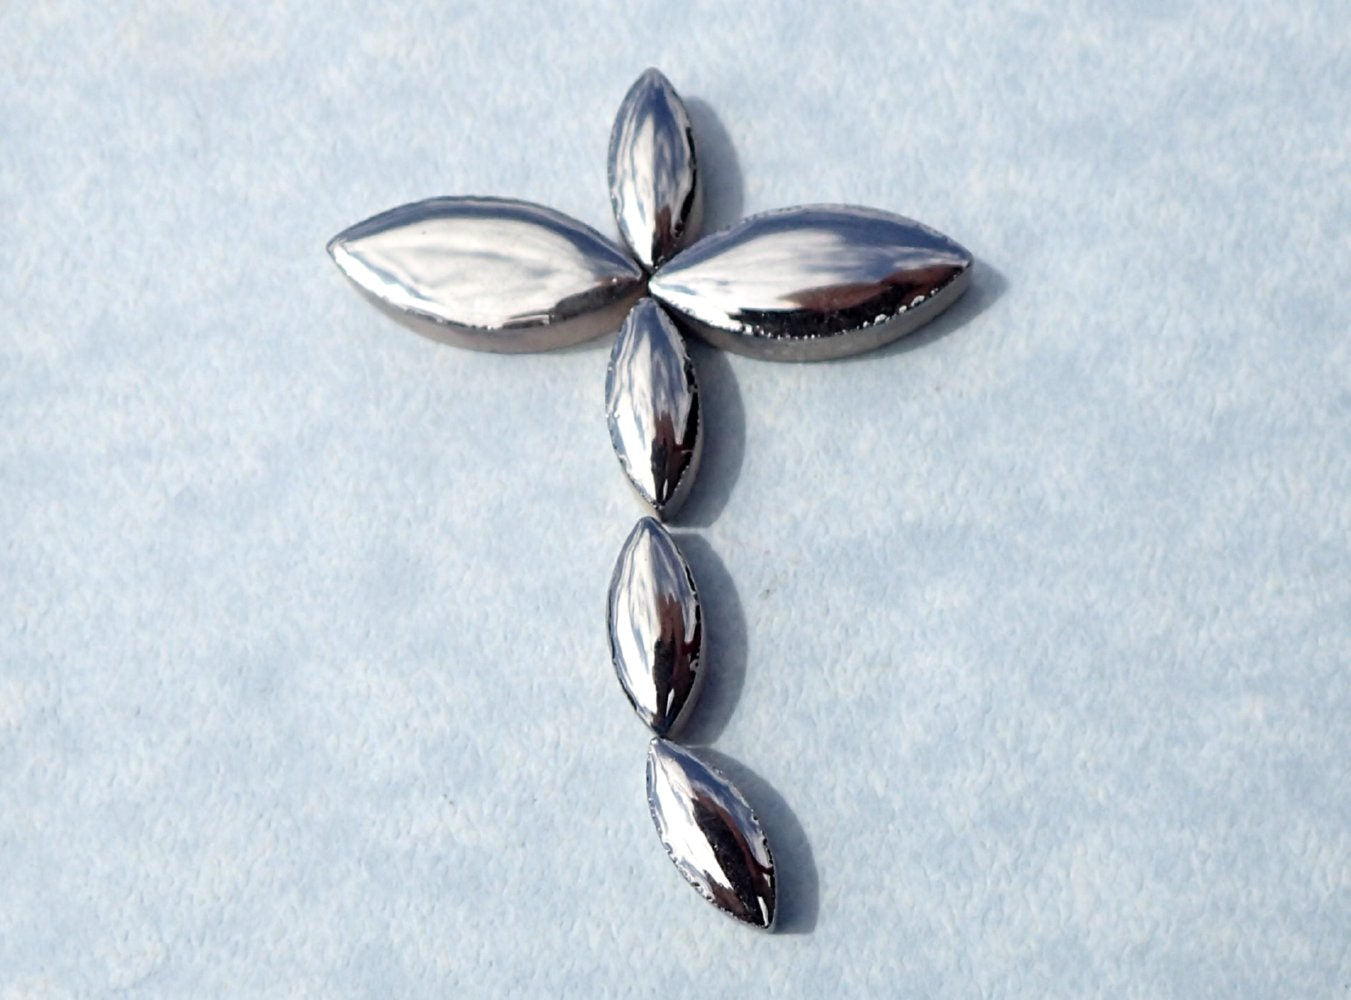 Shiny Silver Petals Mosaic Tiles - 50g Ceramic Metallic Leaves in Mix of 2 Sizes 1/2" and 3/4"